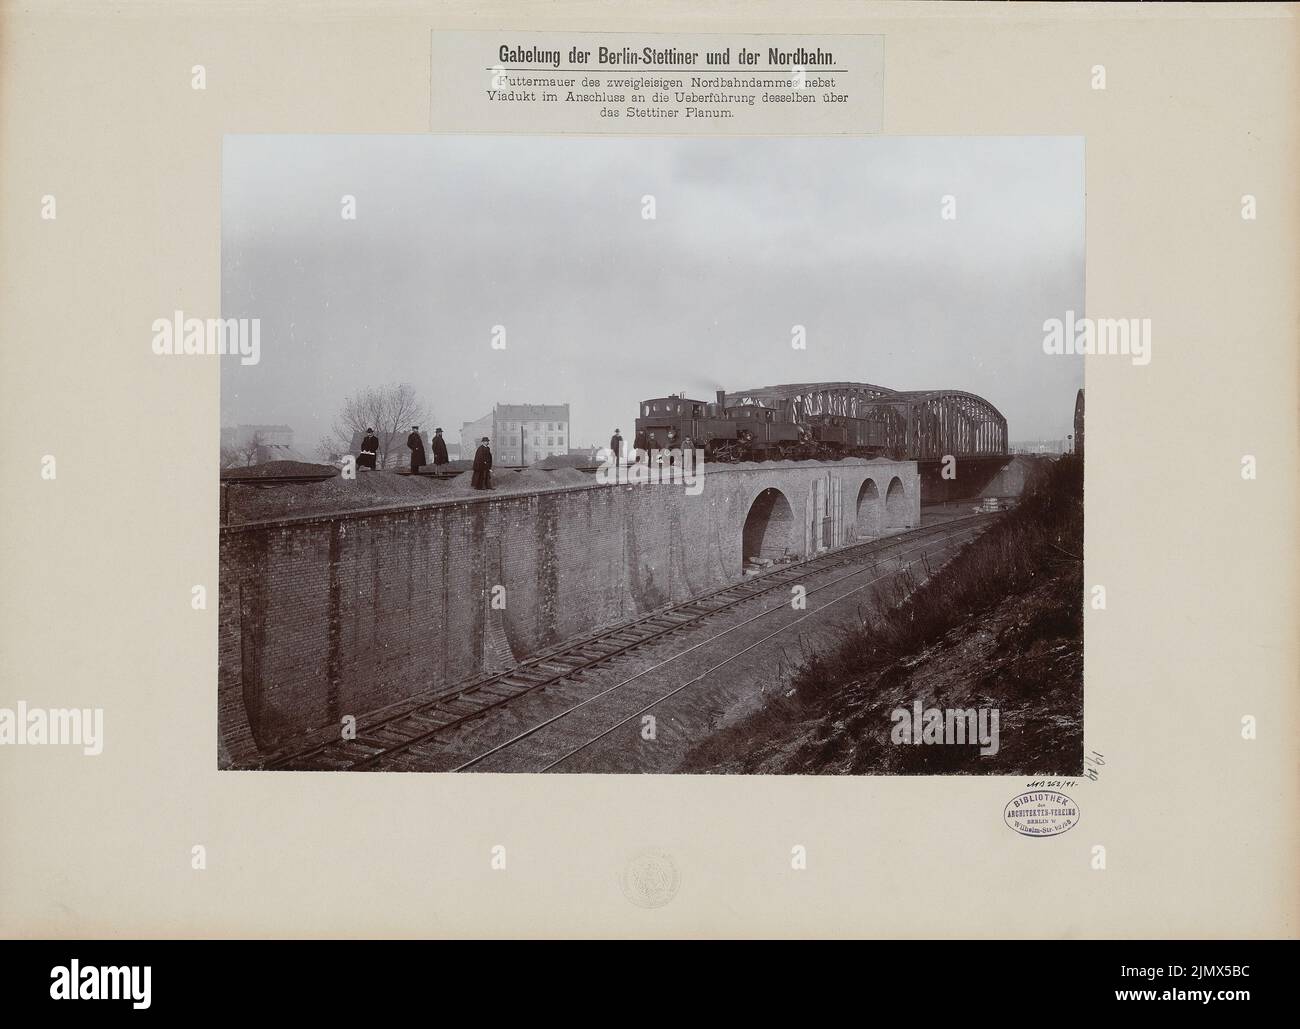 Unknown architect, laying of the Stettin railway between Pankow and Berlin (without dat.): View. Photo on cardboard, 42.5 x 58.7 cm (including scan edges) N.N. : Gabelung der Berlin-Stettiner und der Nordbahn Stock Photo